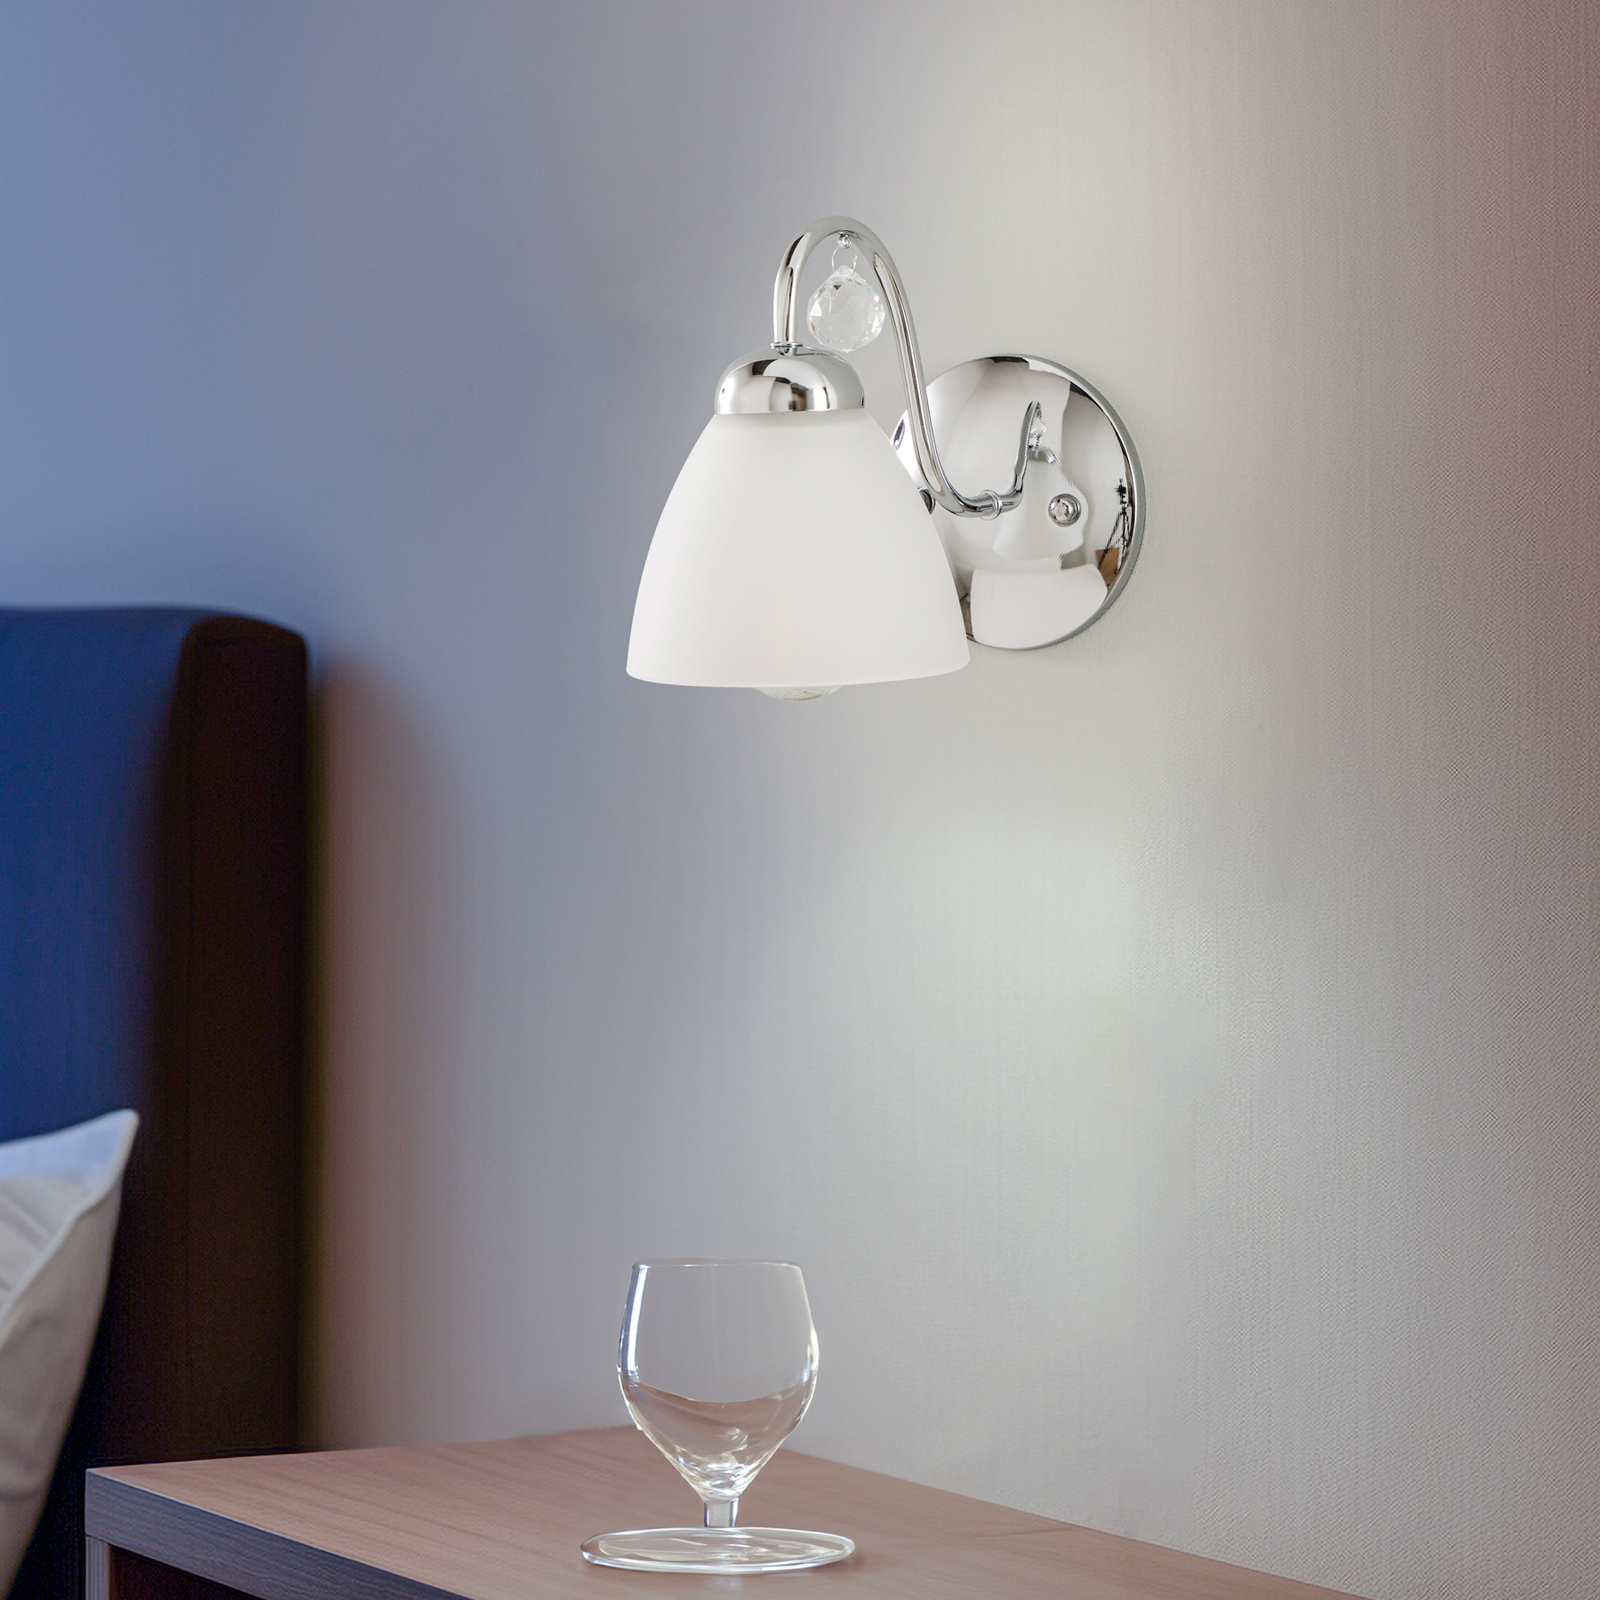 Miranda wall light with a glass lampshade, chrome